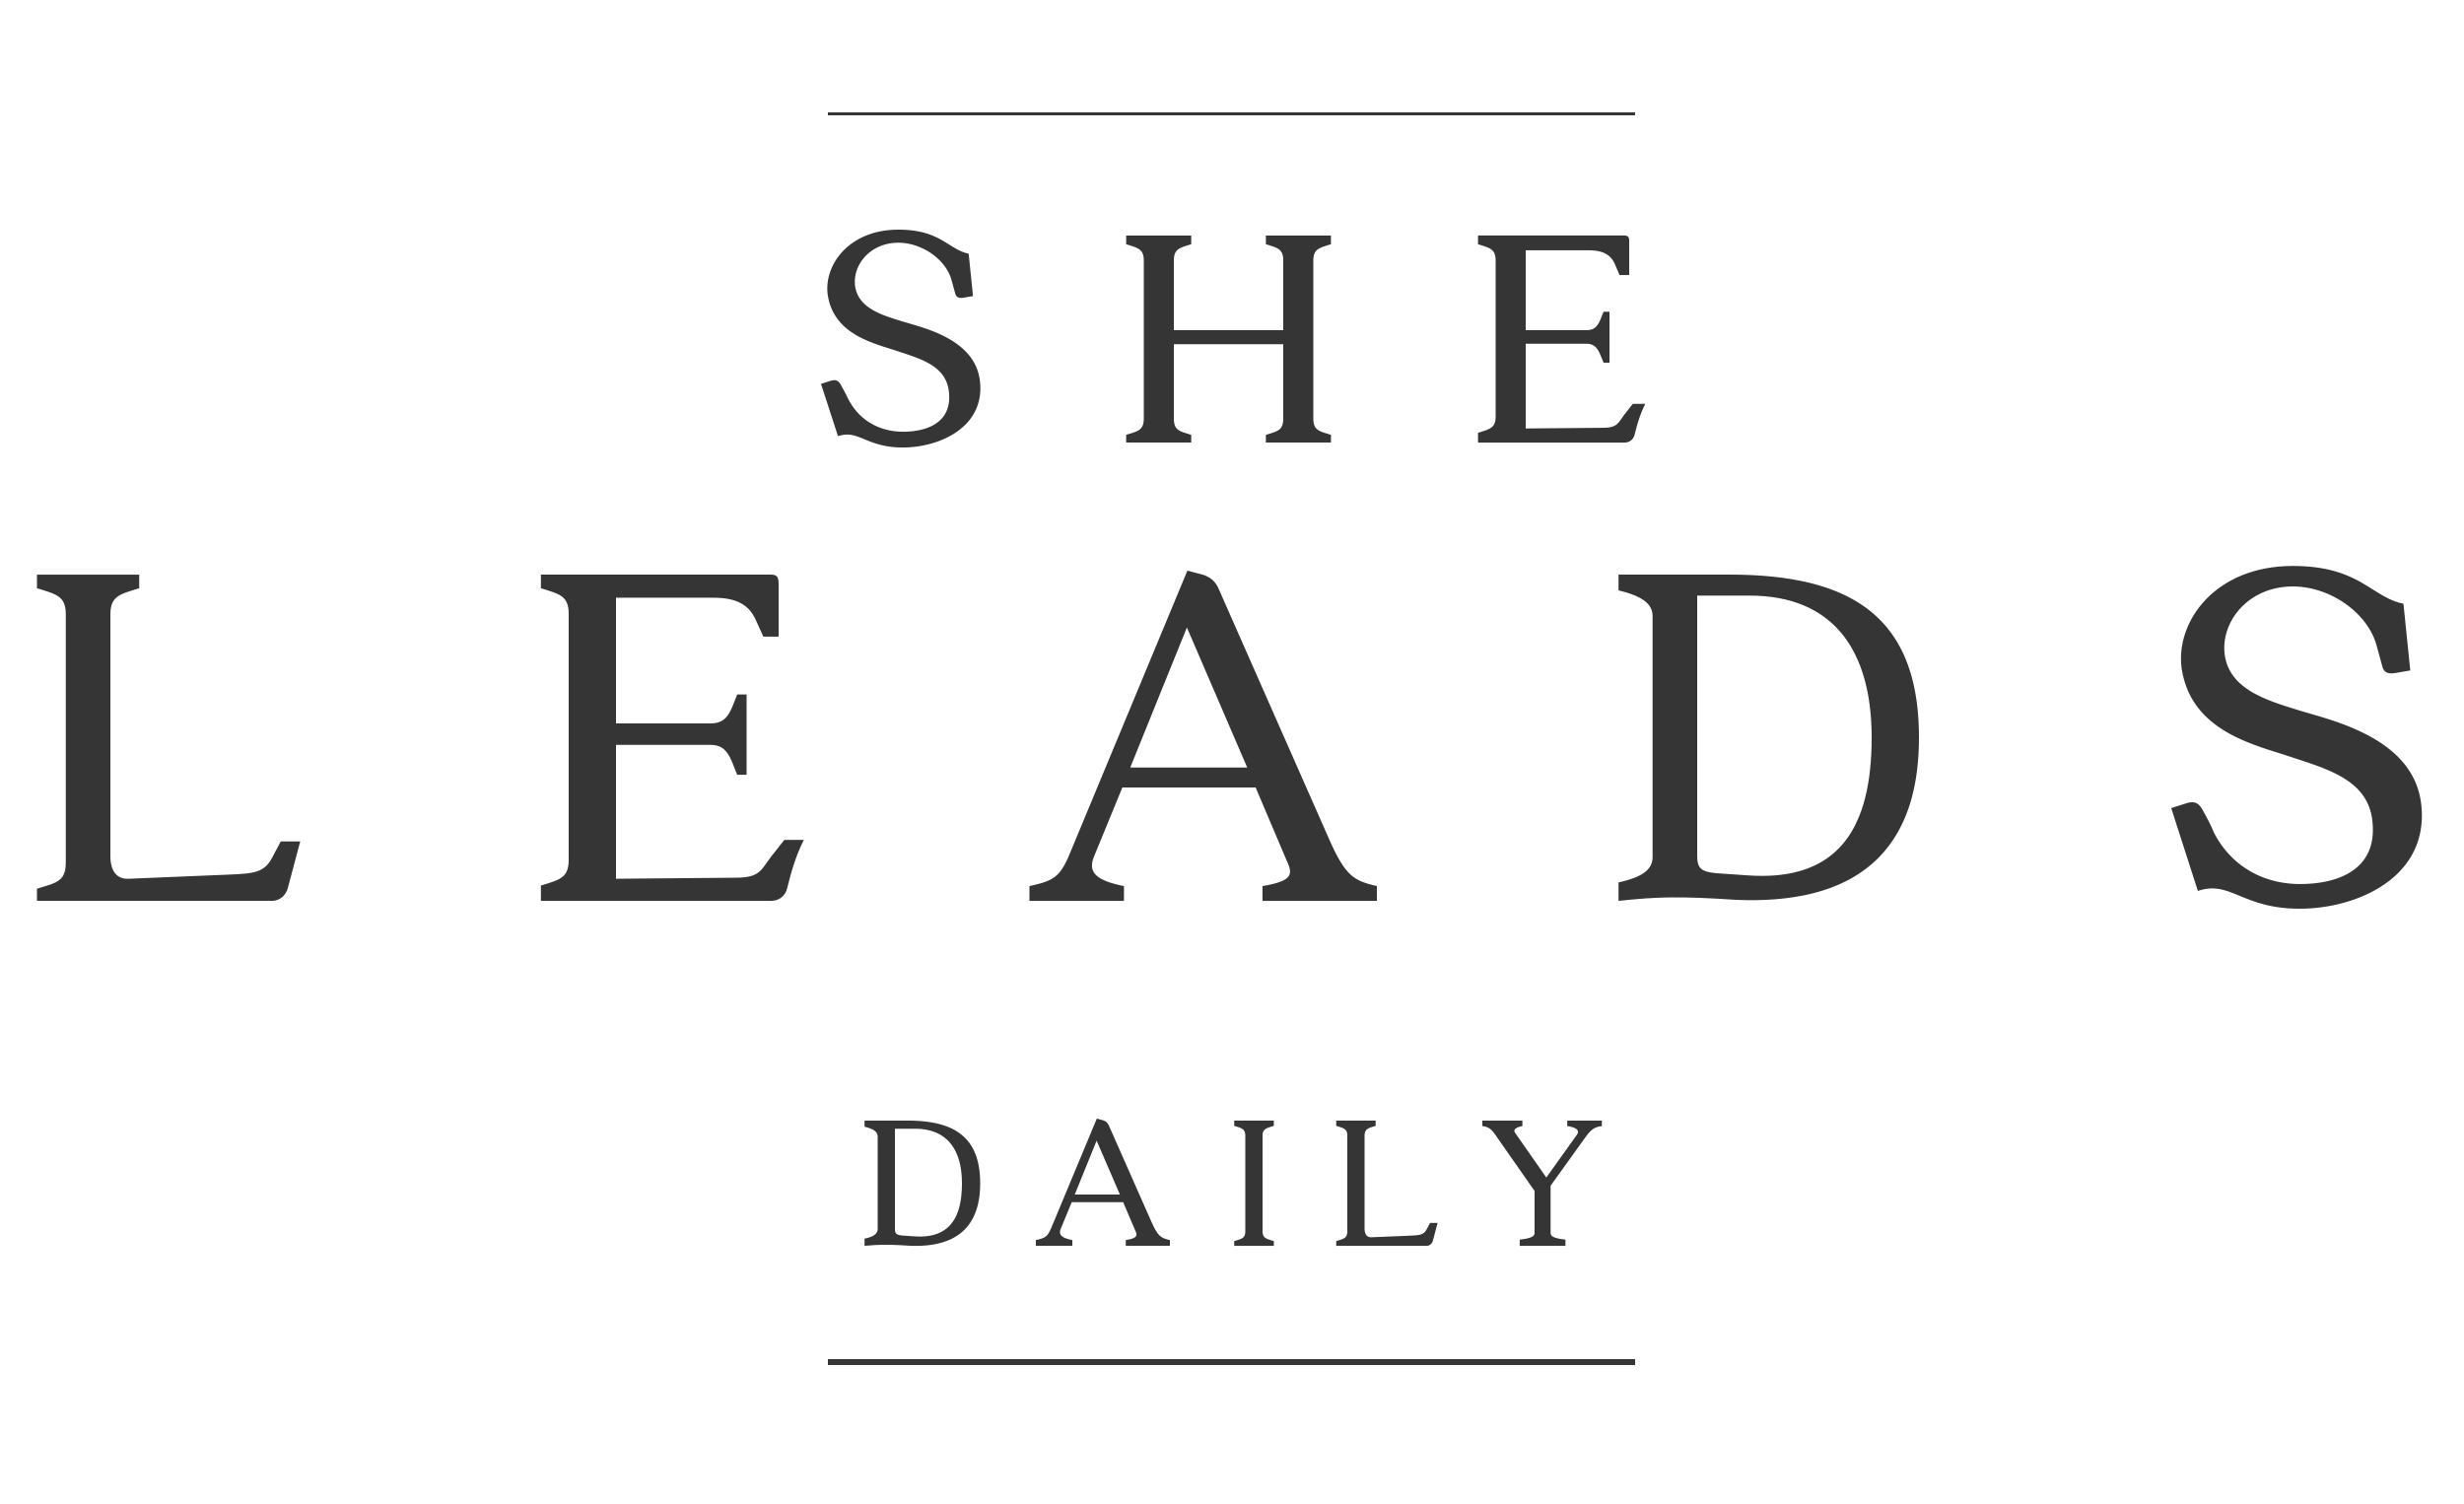 She Leads Daily